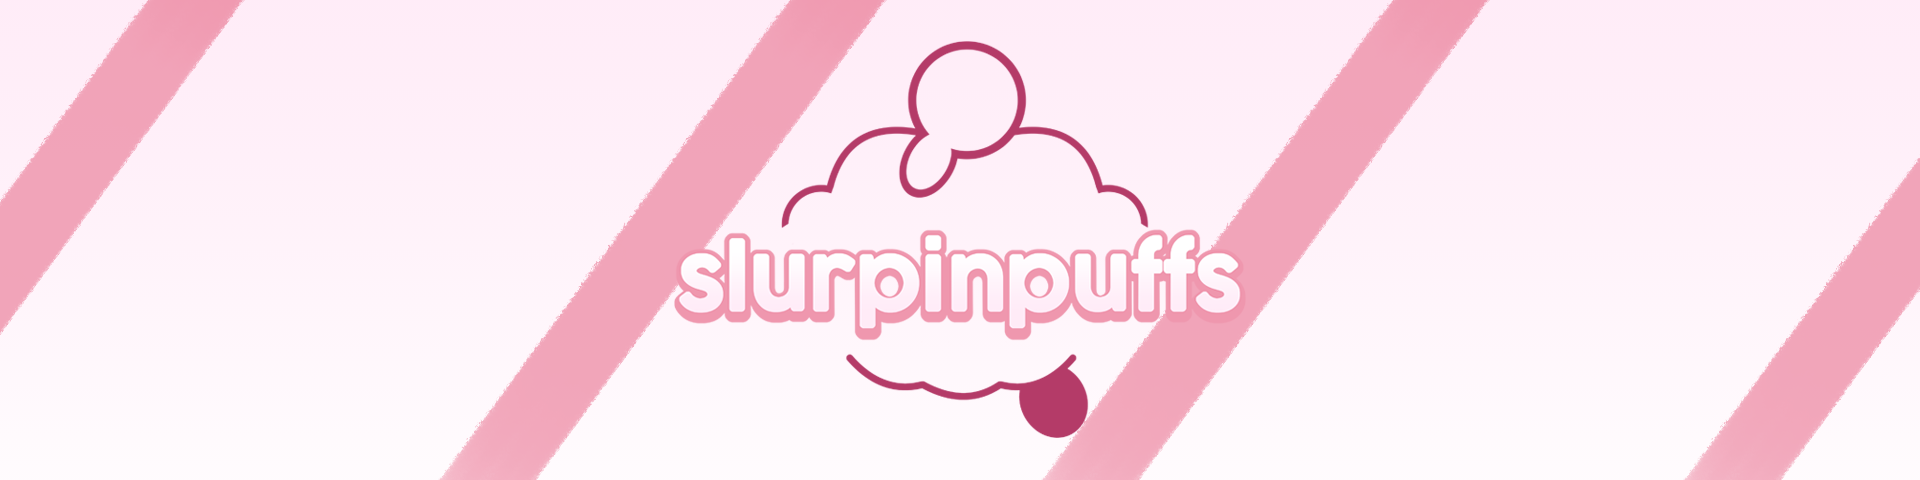 A banner image containing a simplified Slurpuff logo on a pink background.